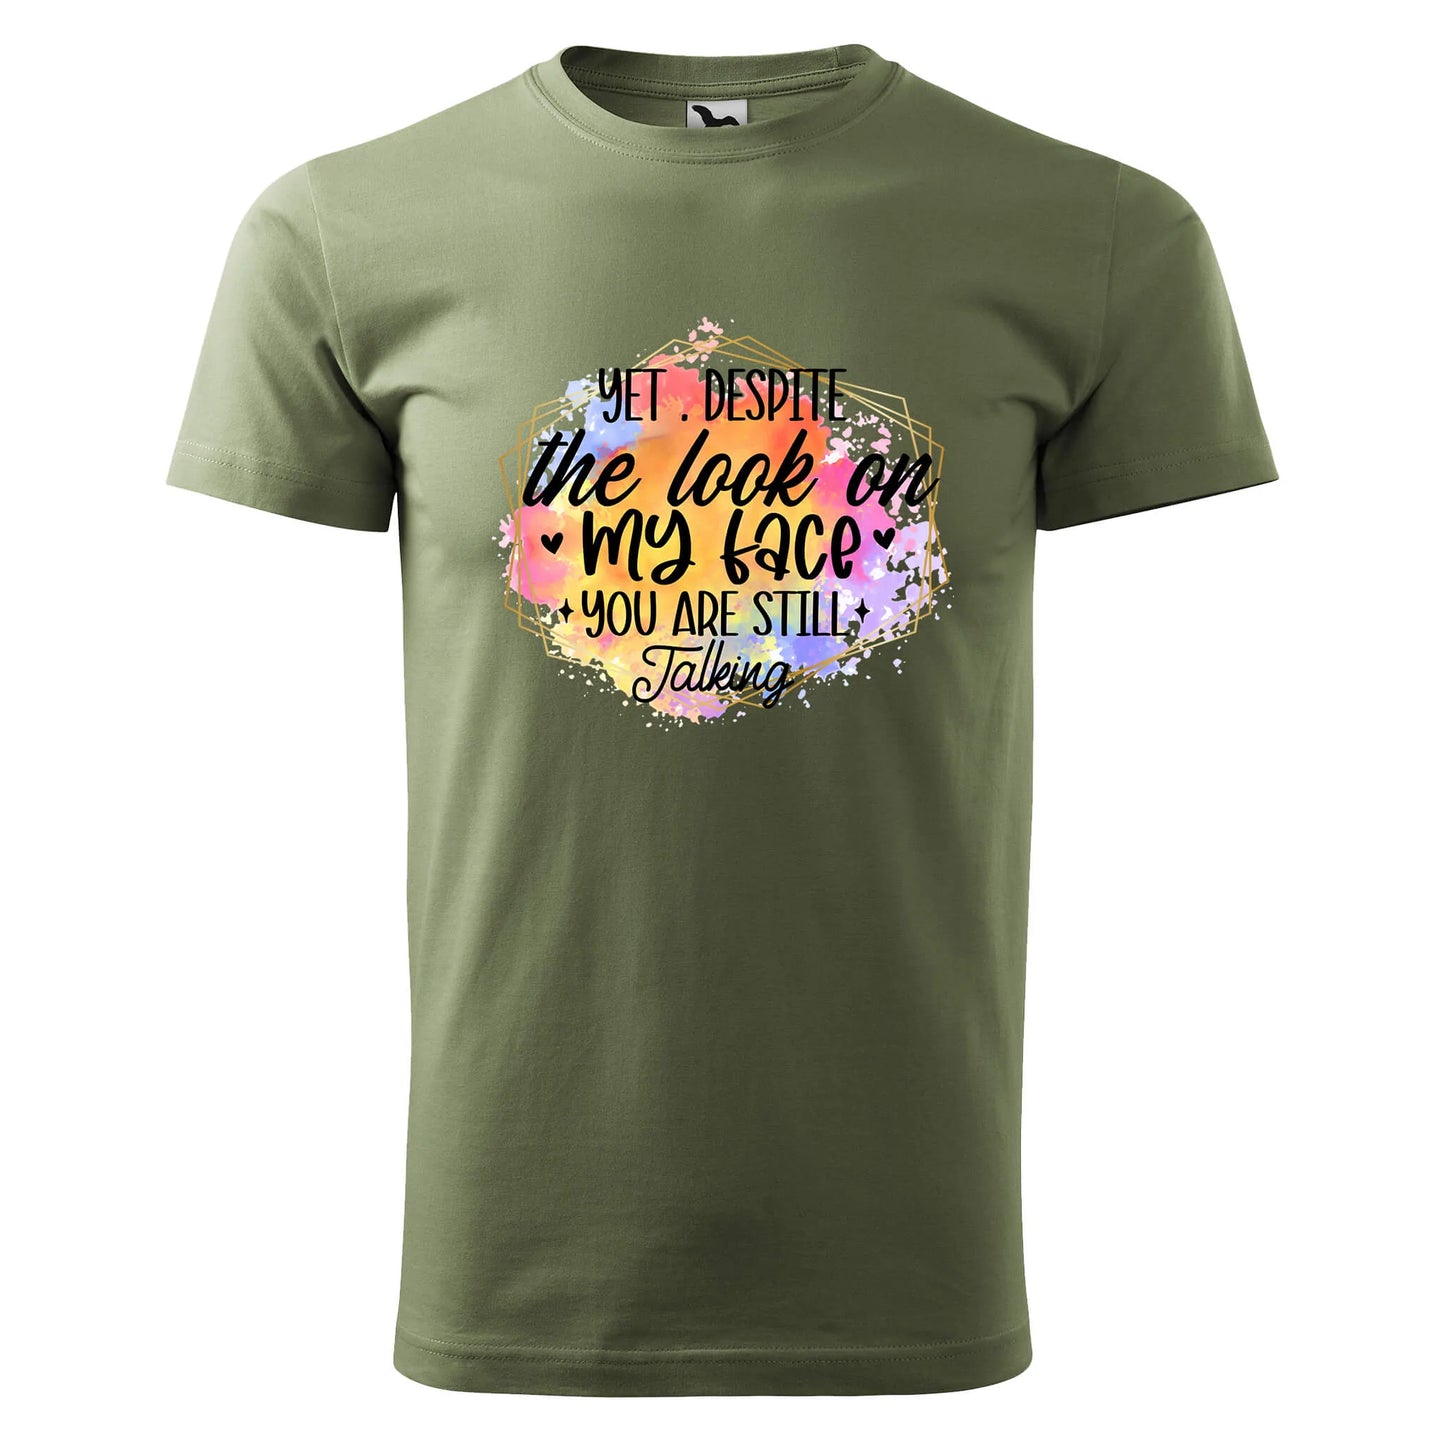 Yet despite the look on my face t-shirt - rvdesignprint